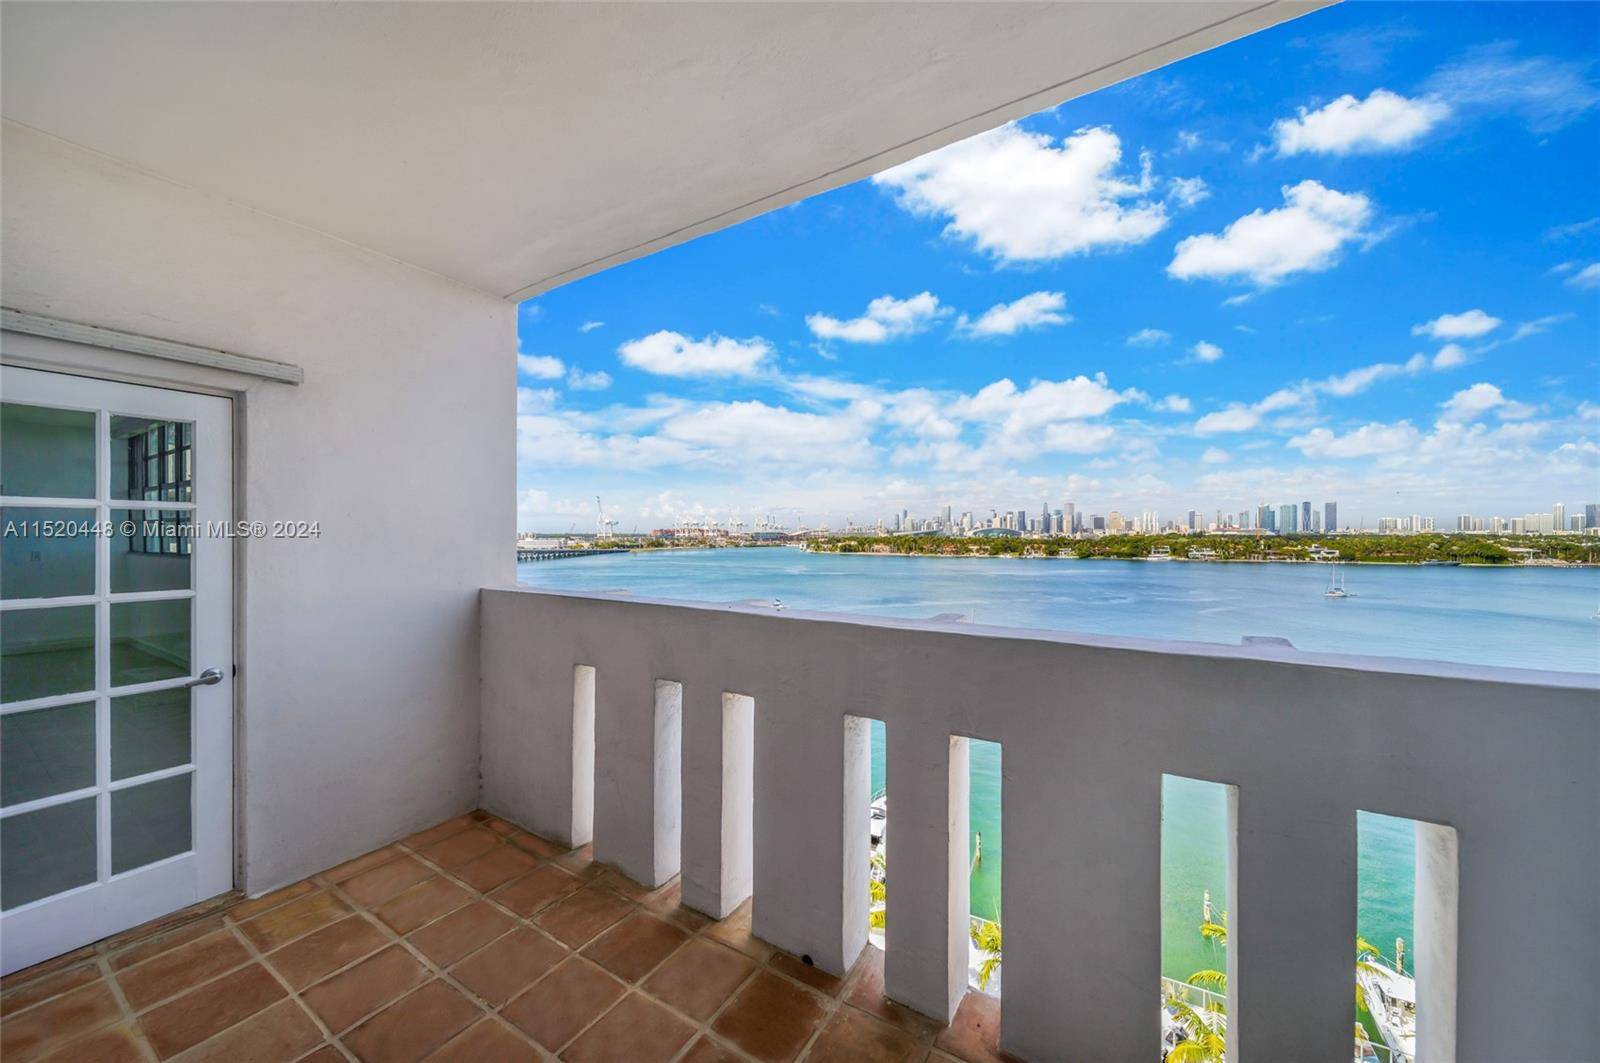 Stunning Penthouse with DIRECT view of the bay, star island, the venetian islands, hibiscus and palm with a magnificent wide view of Brickell, Downtown, Edgewater and Midtown from the distance.